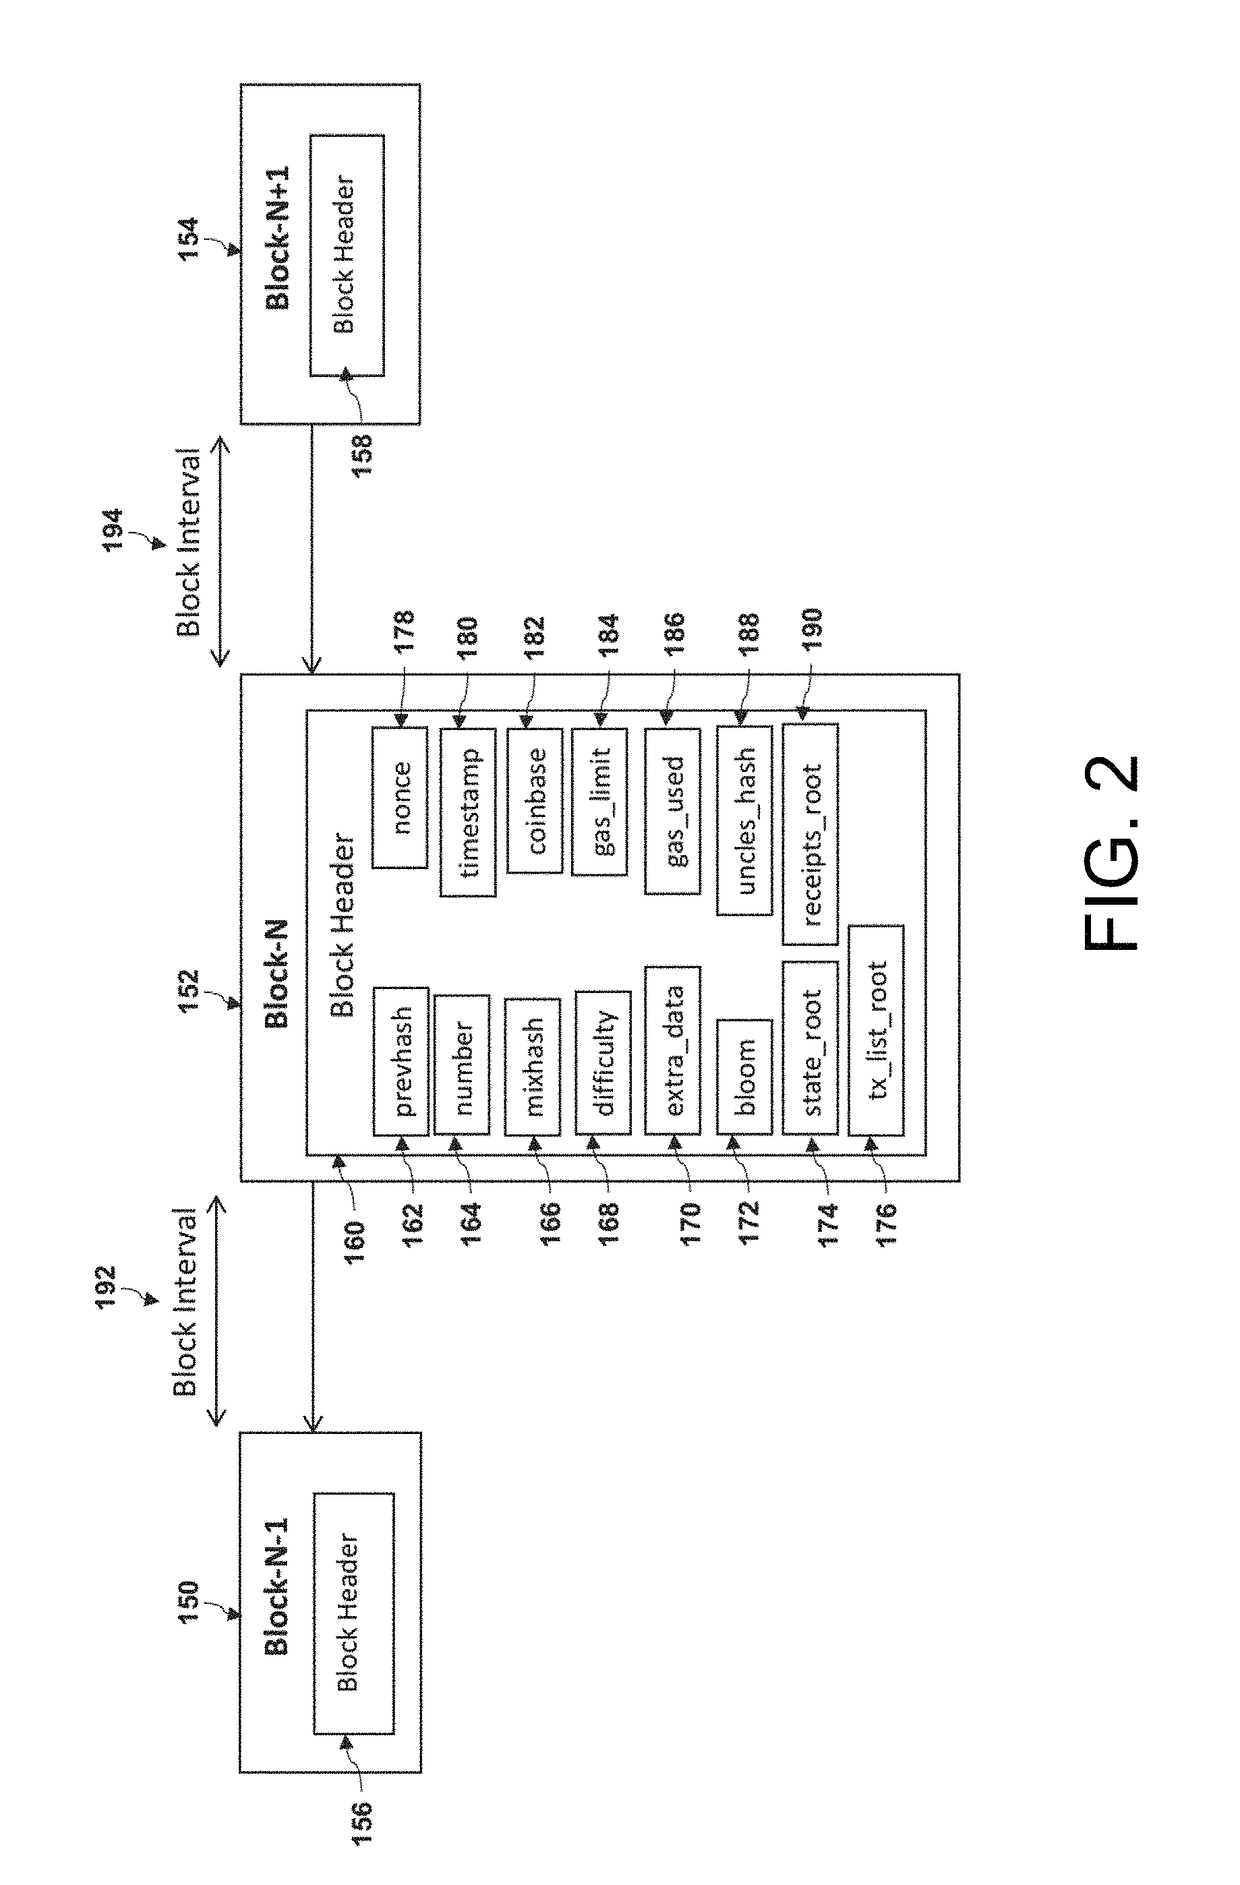 Method and system for tuning blockchain scalability for fast and low-cost payment and transaction processing